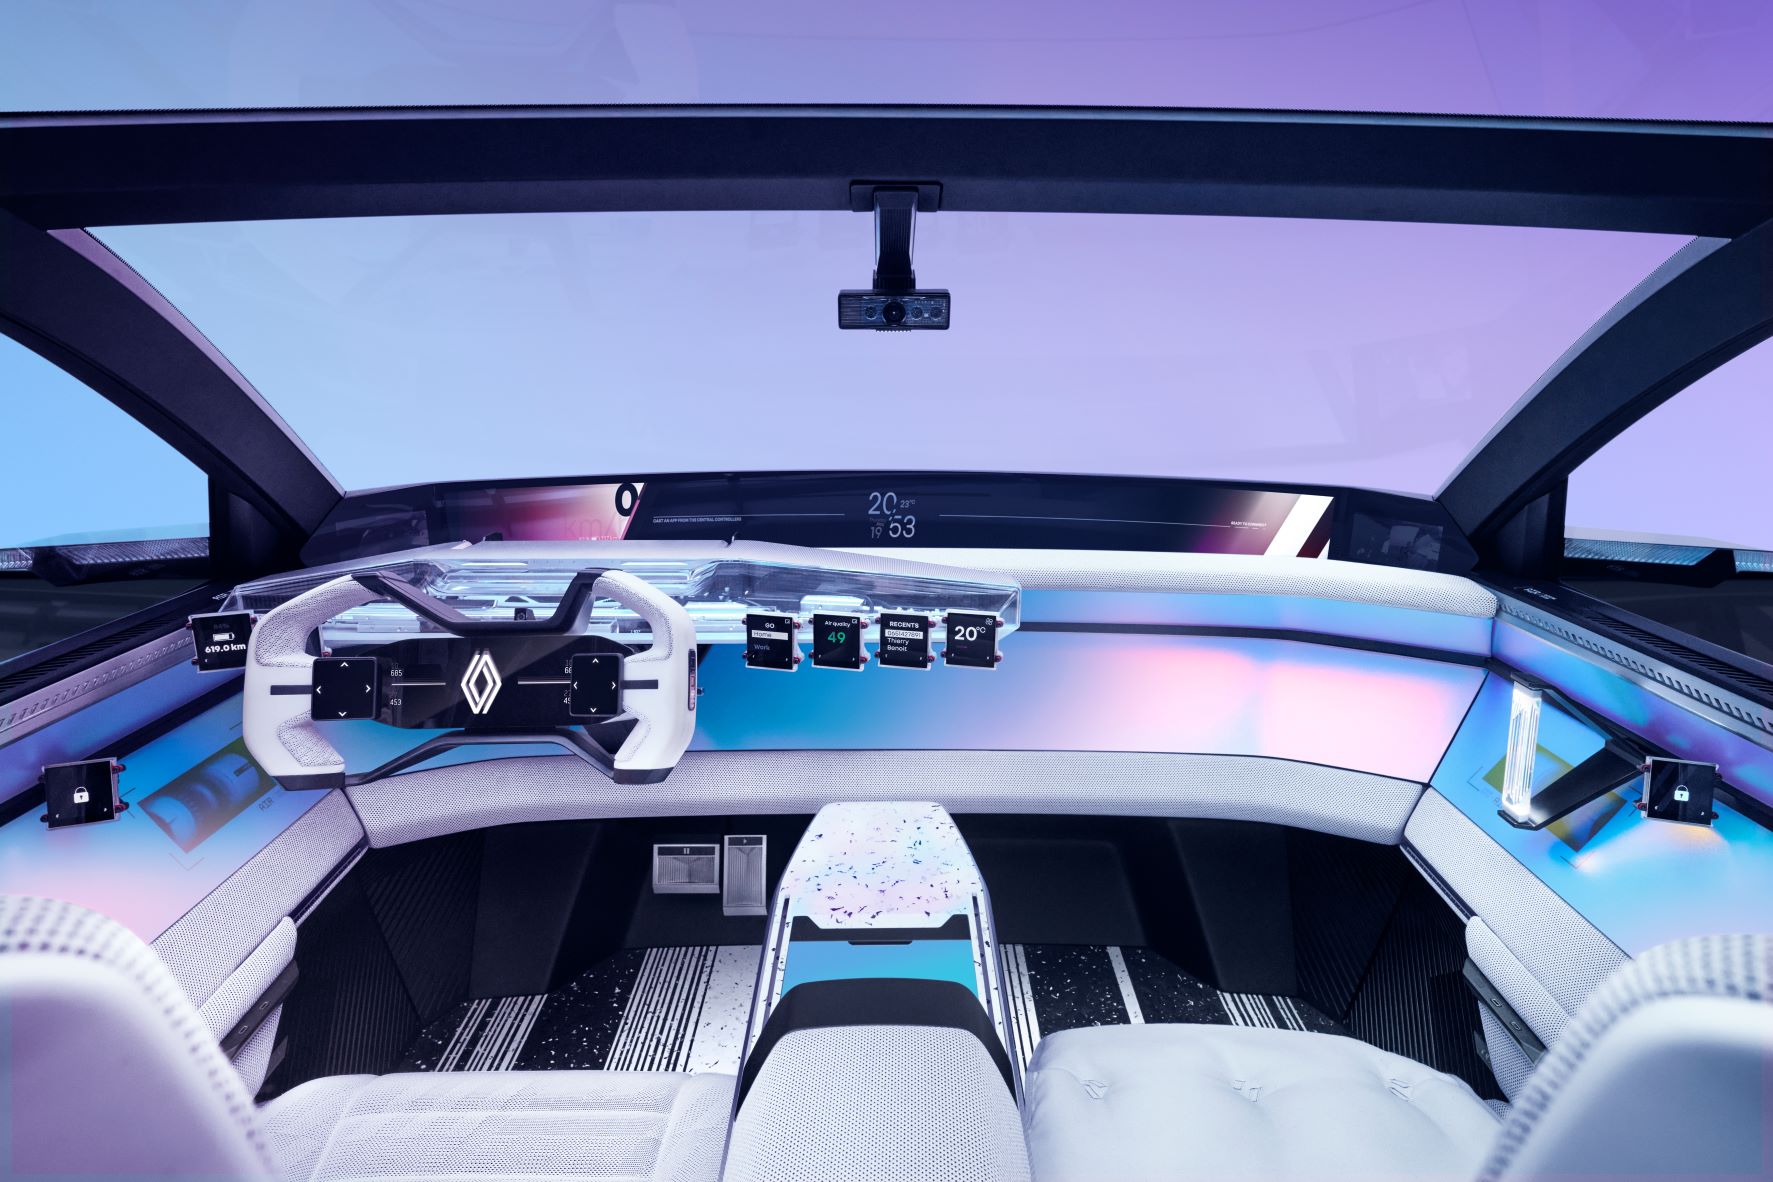 Interior of the Renault Scenic Vision concept